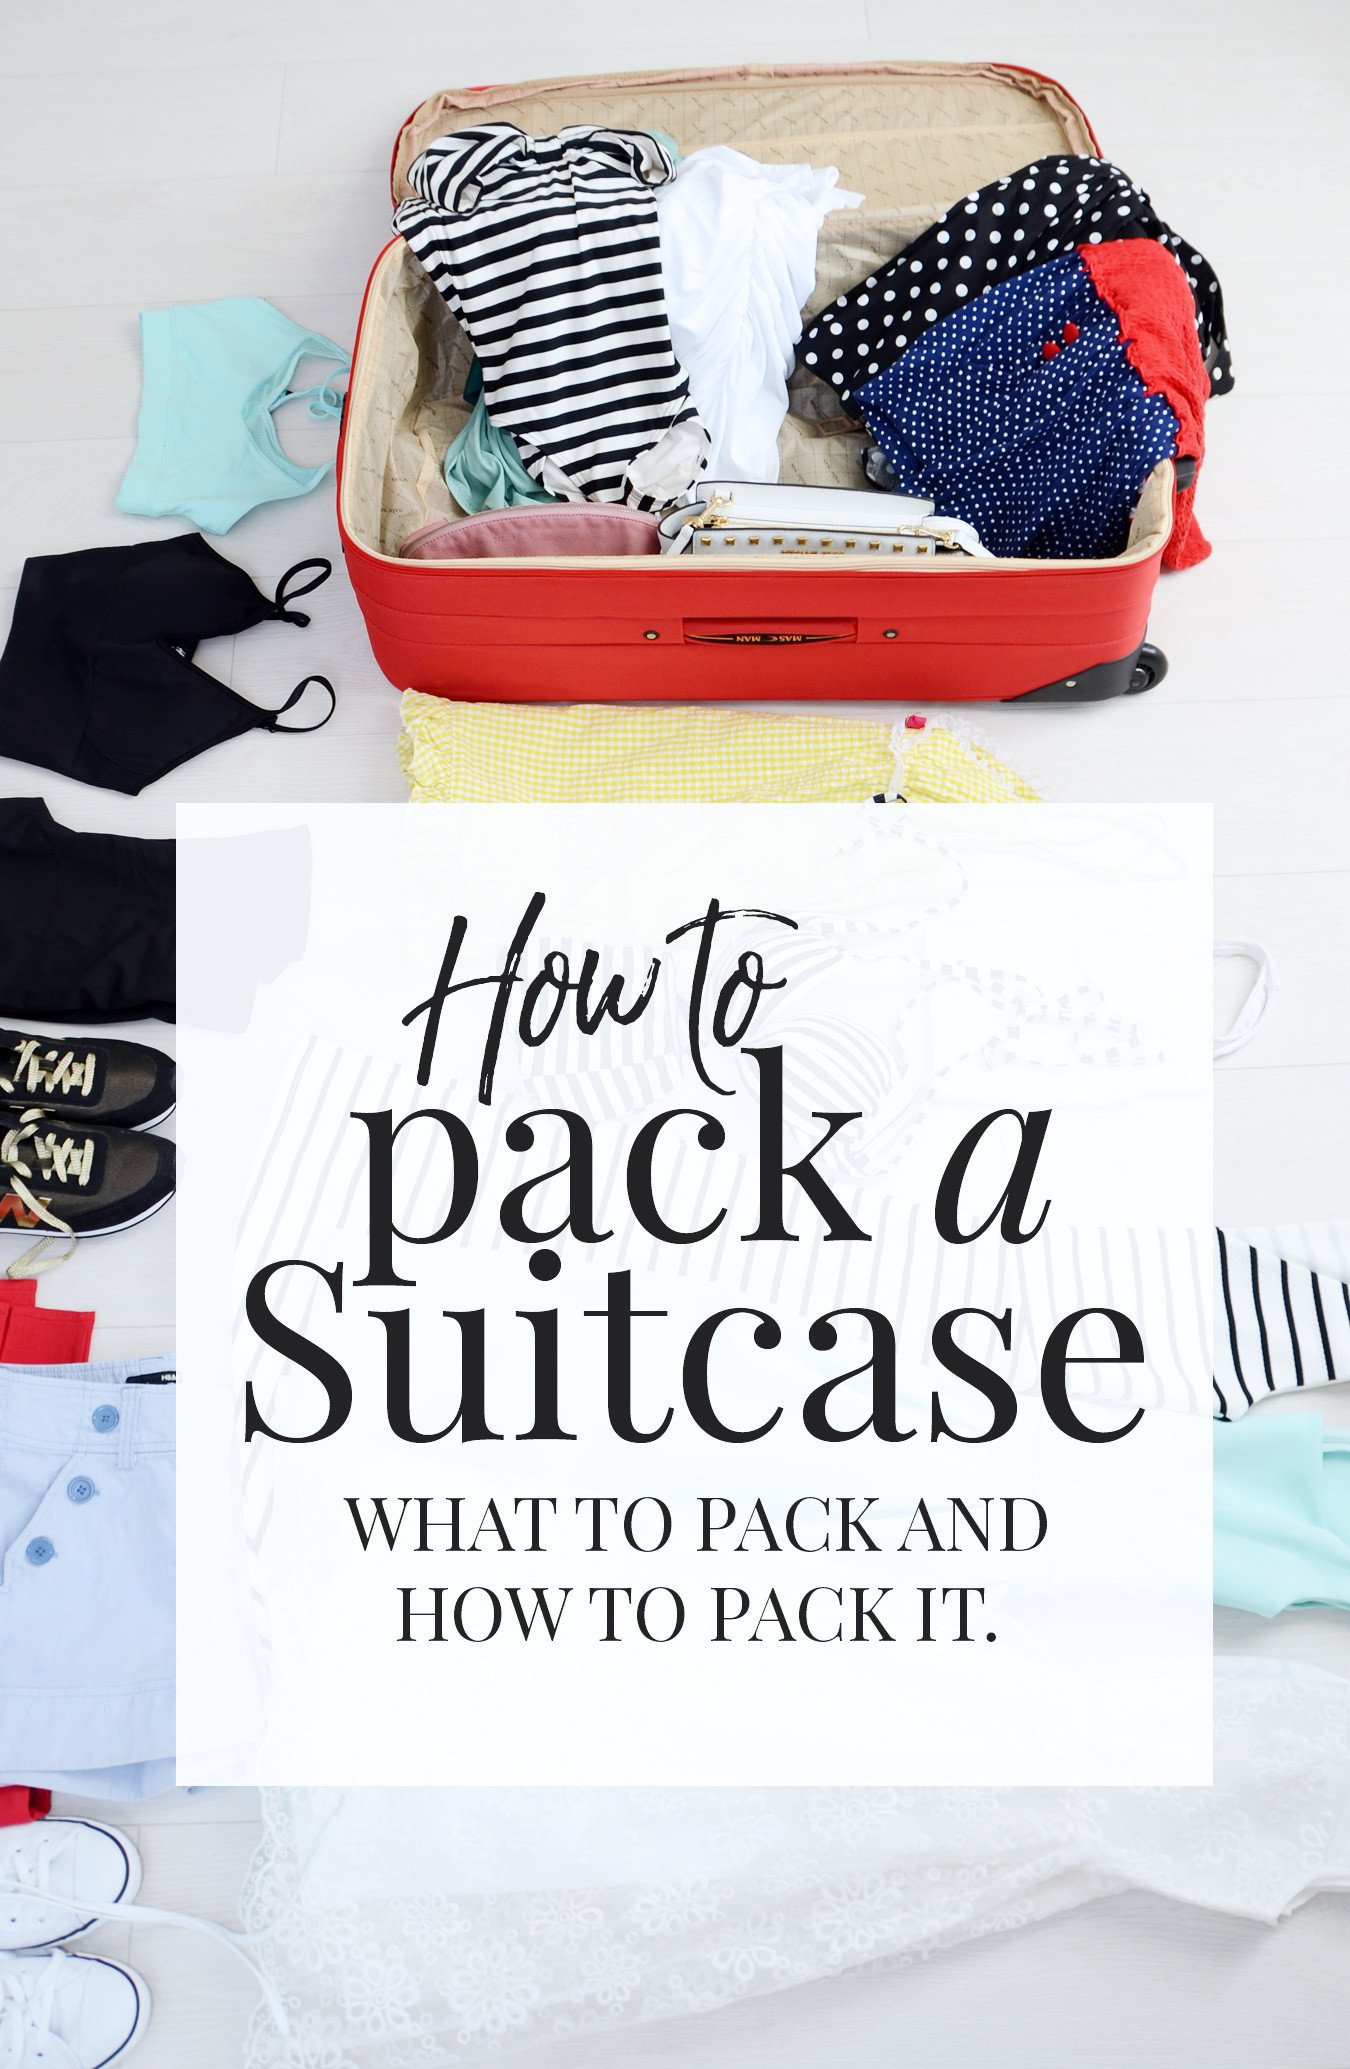 How to pack a suitcase: what to pack, and how to pack it